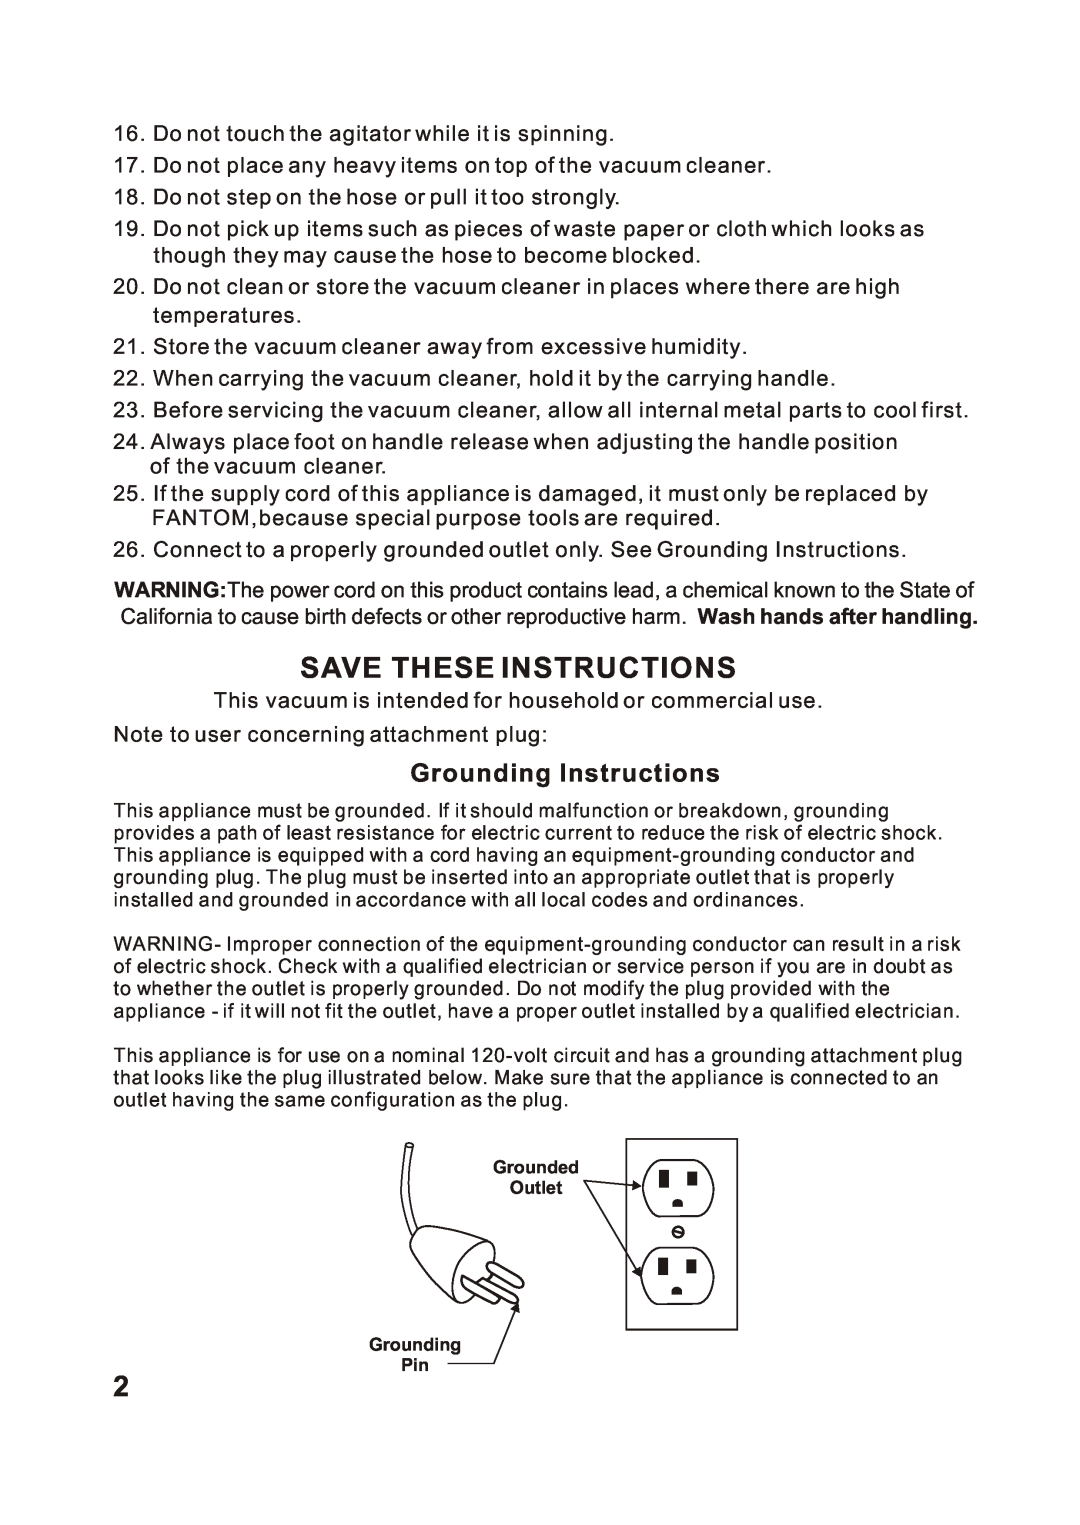 Fantom Vacuum FC285H Save These Instructions, Grounding Instructions, Do not touch the agitator while it is spinning 